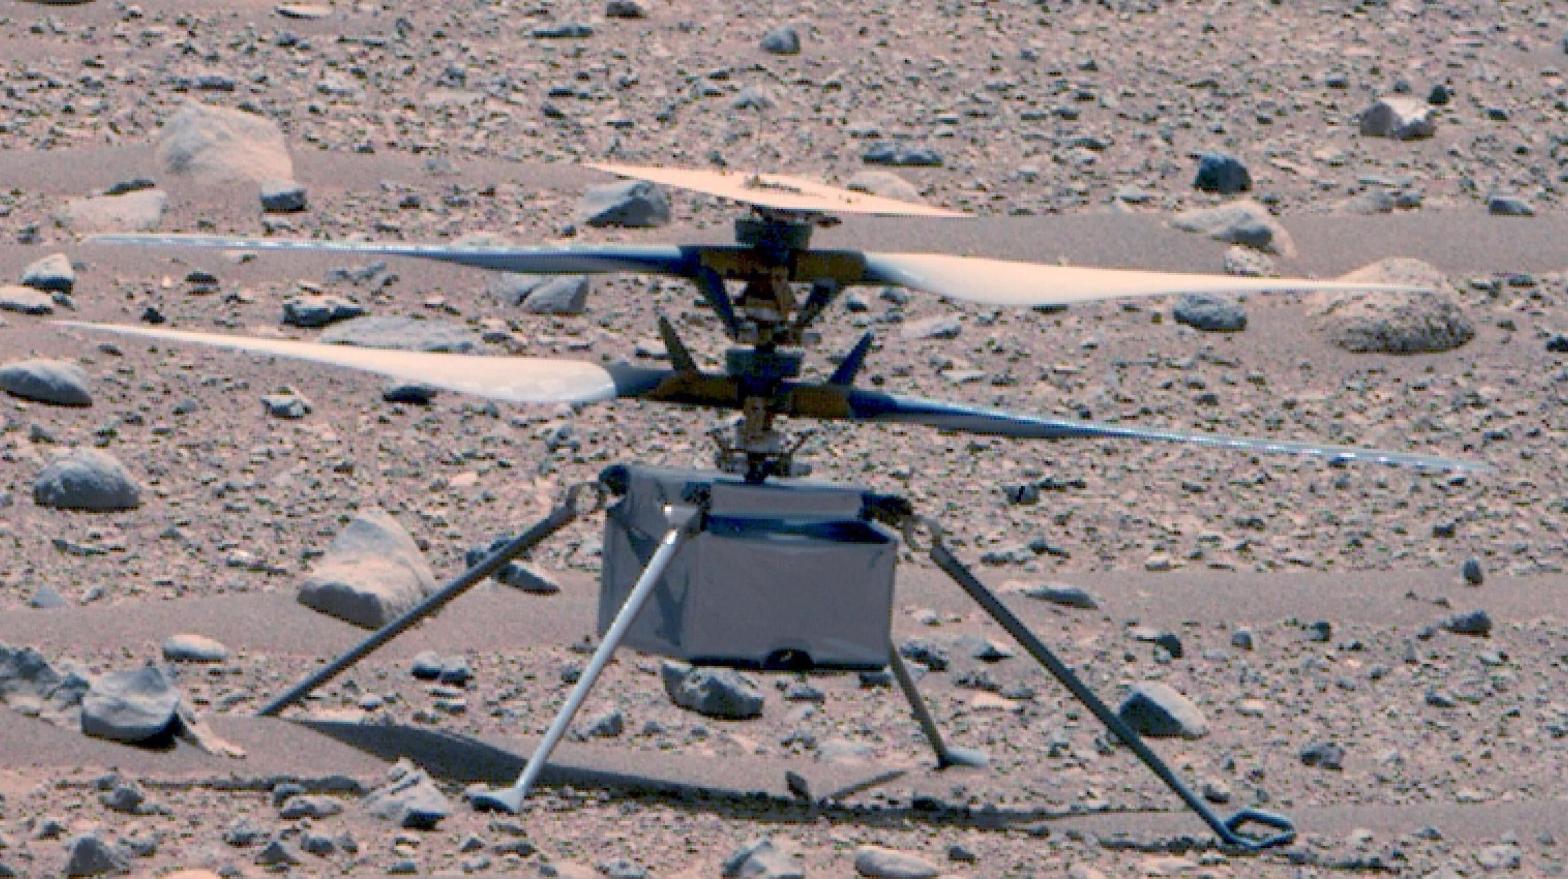 The Perseverance rover captured this photo of the Ingenuity helicopter on the surface of Mars on April 16. (Image: NASA/JPL-Caltech/ASU/MSSS)